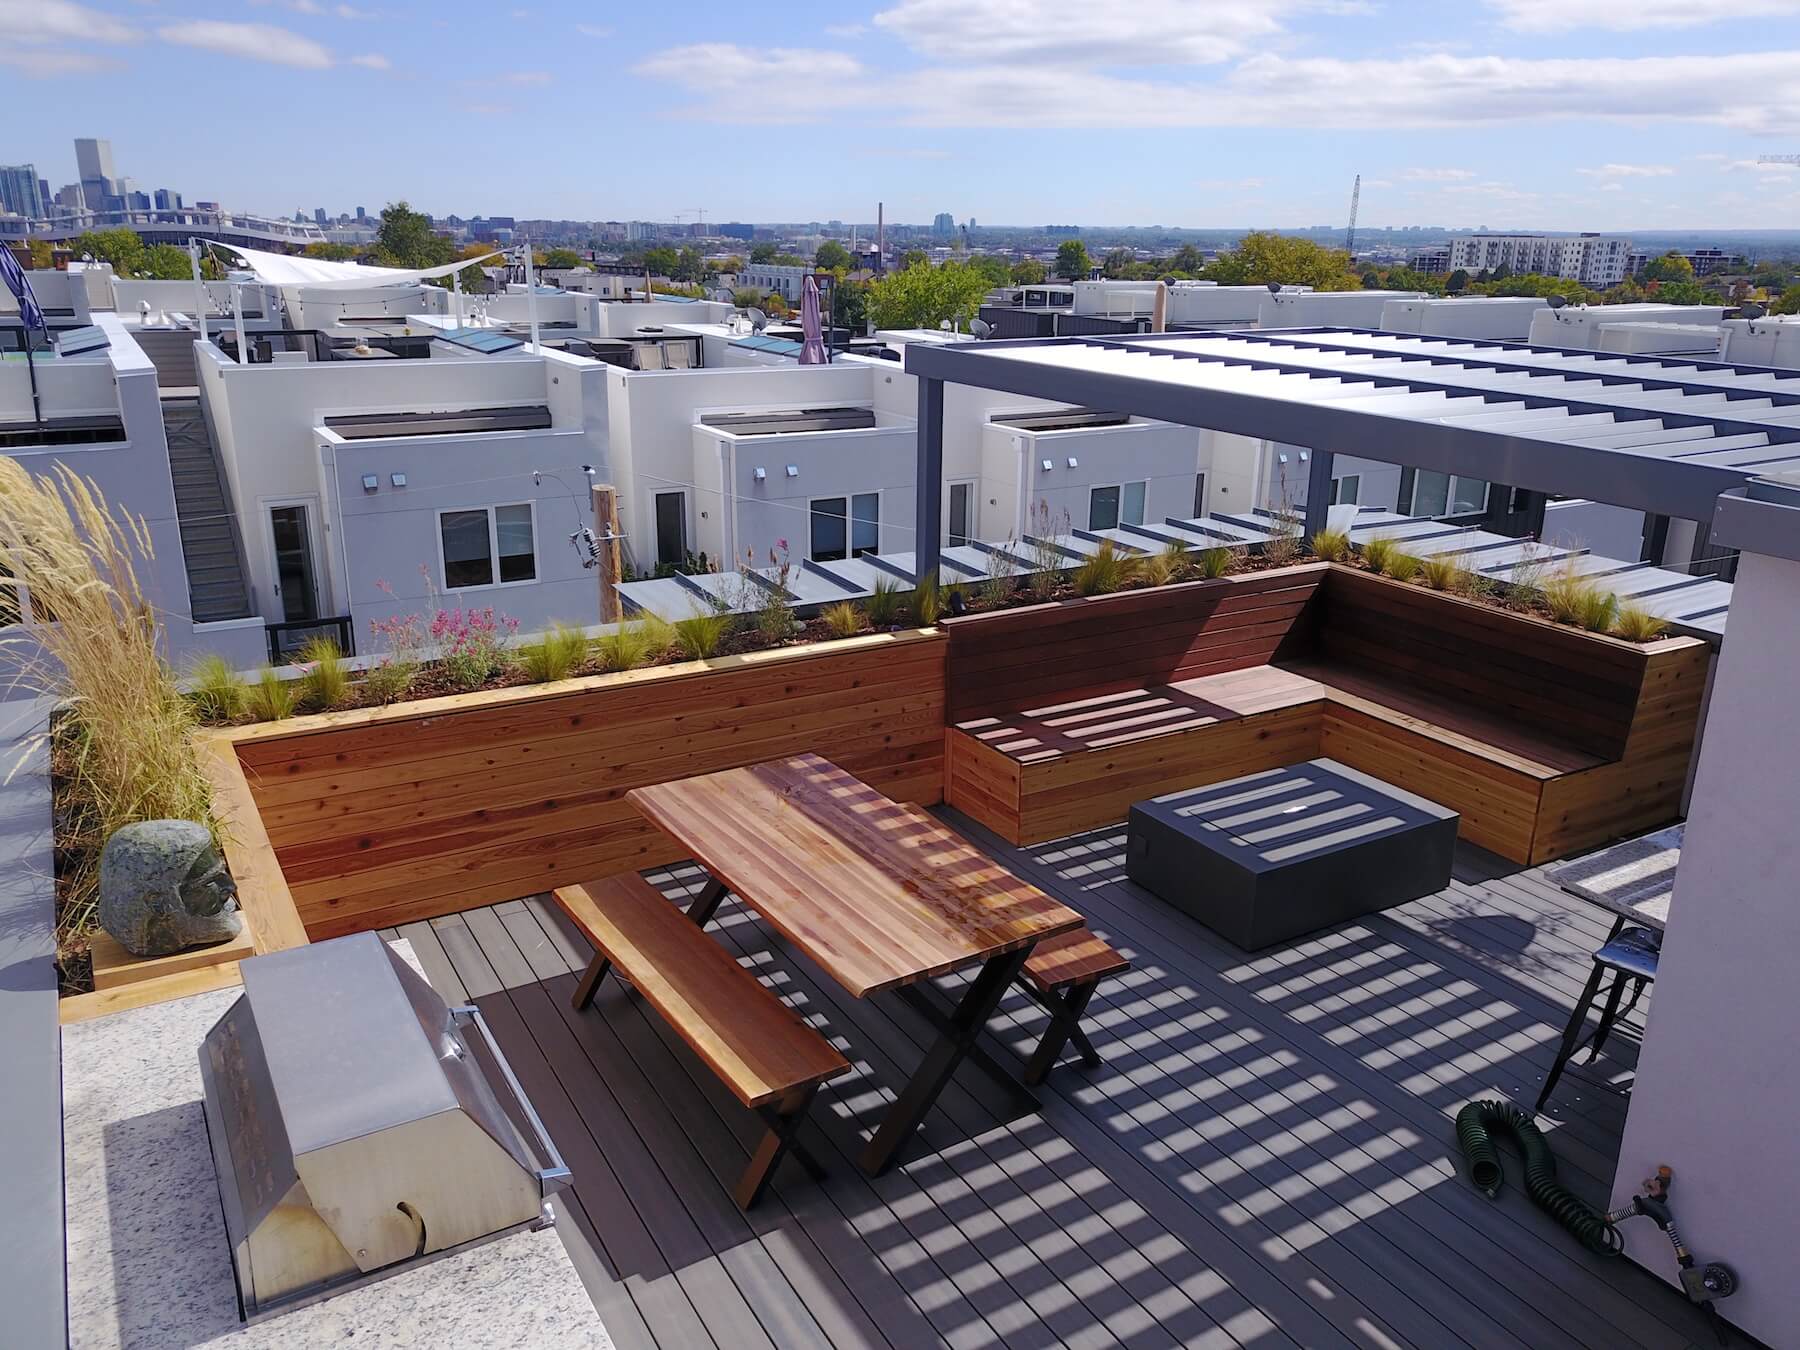 Roof Deck Planters Outdoor furniture Pergola Sloans Lake Denver CO Roof Deck and Garden